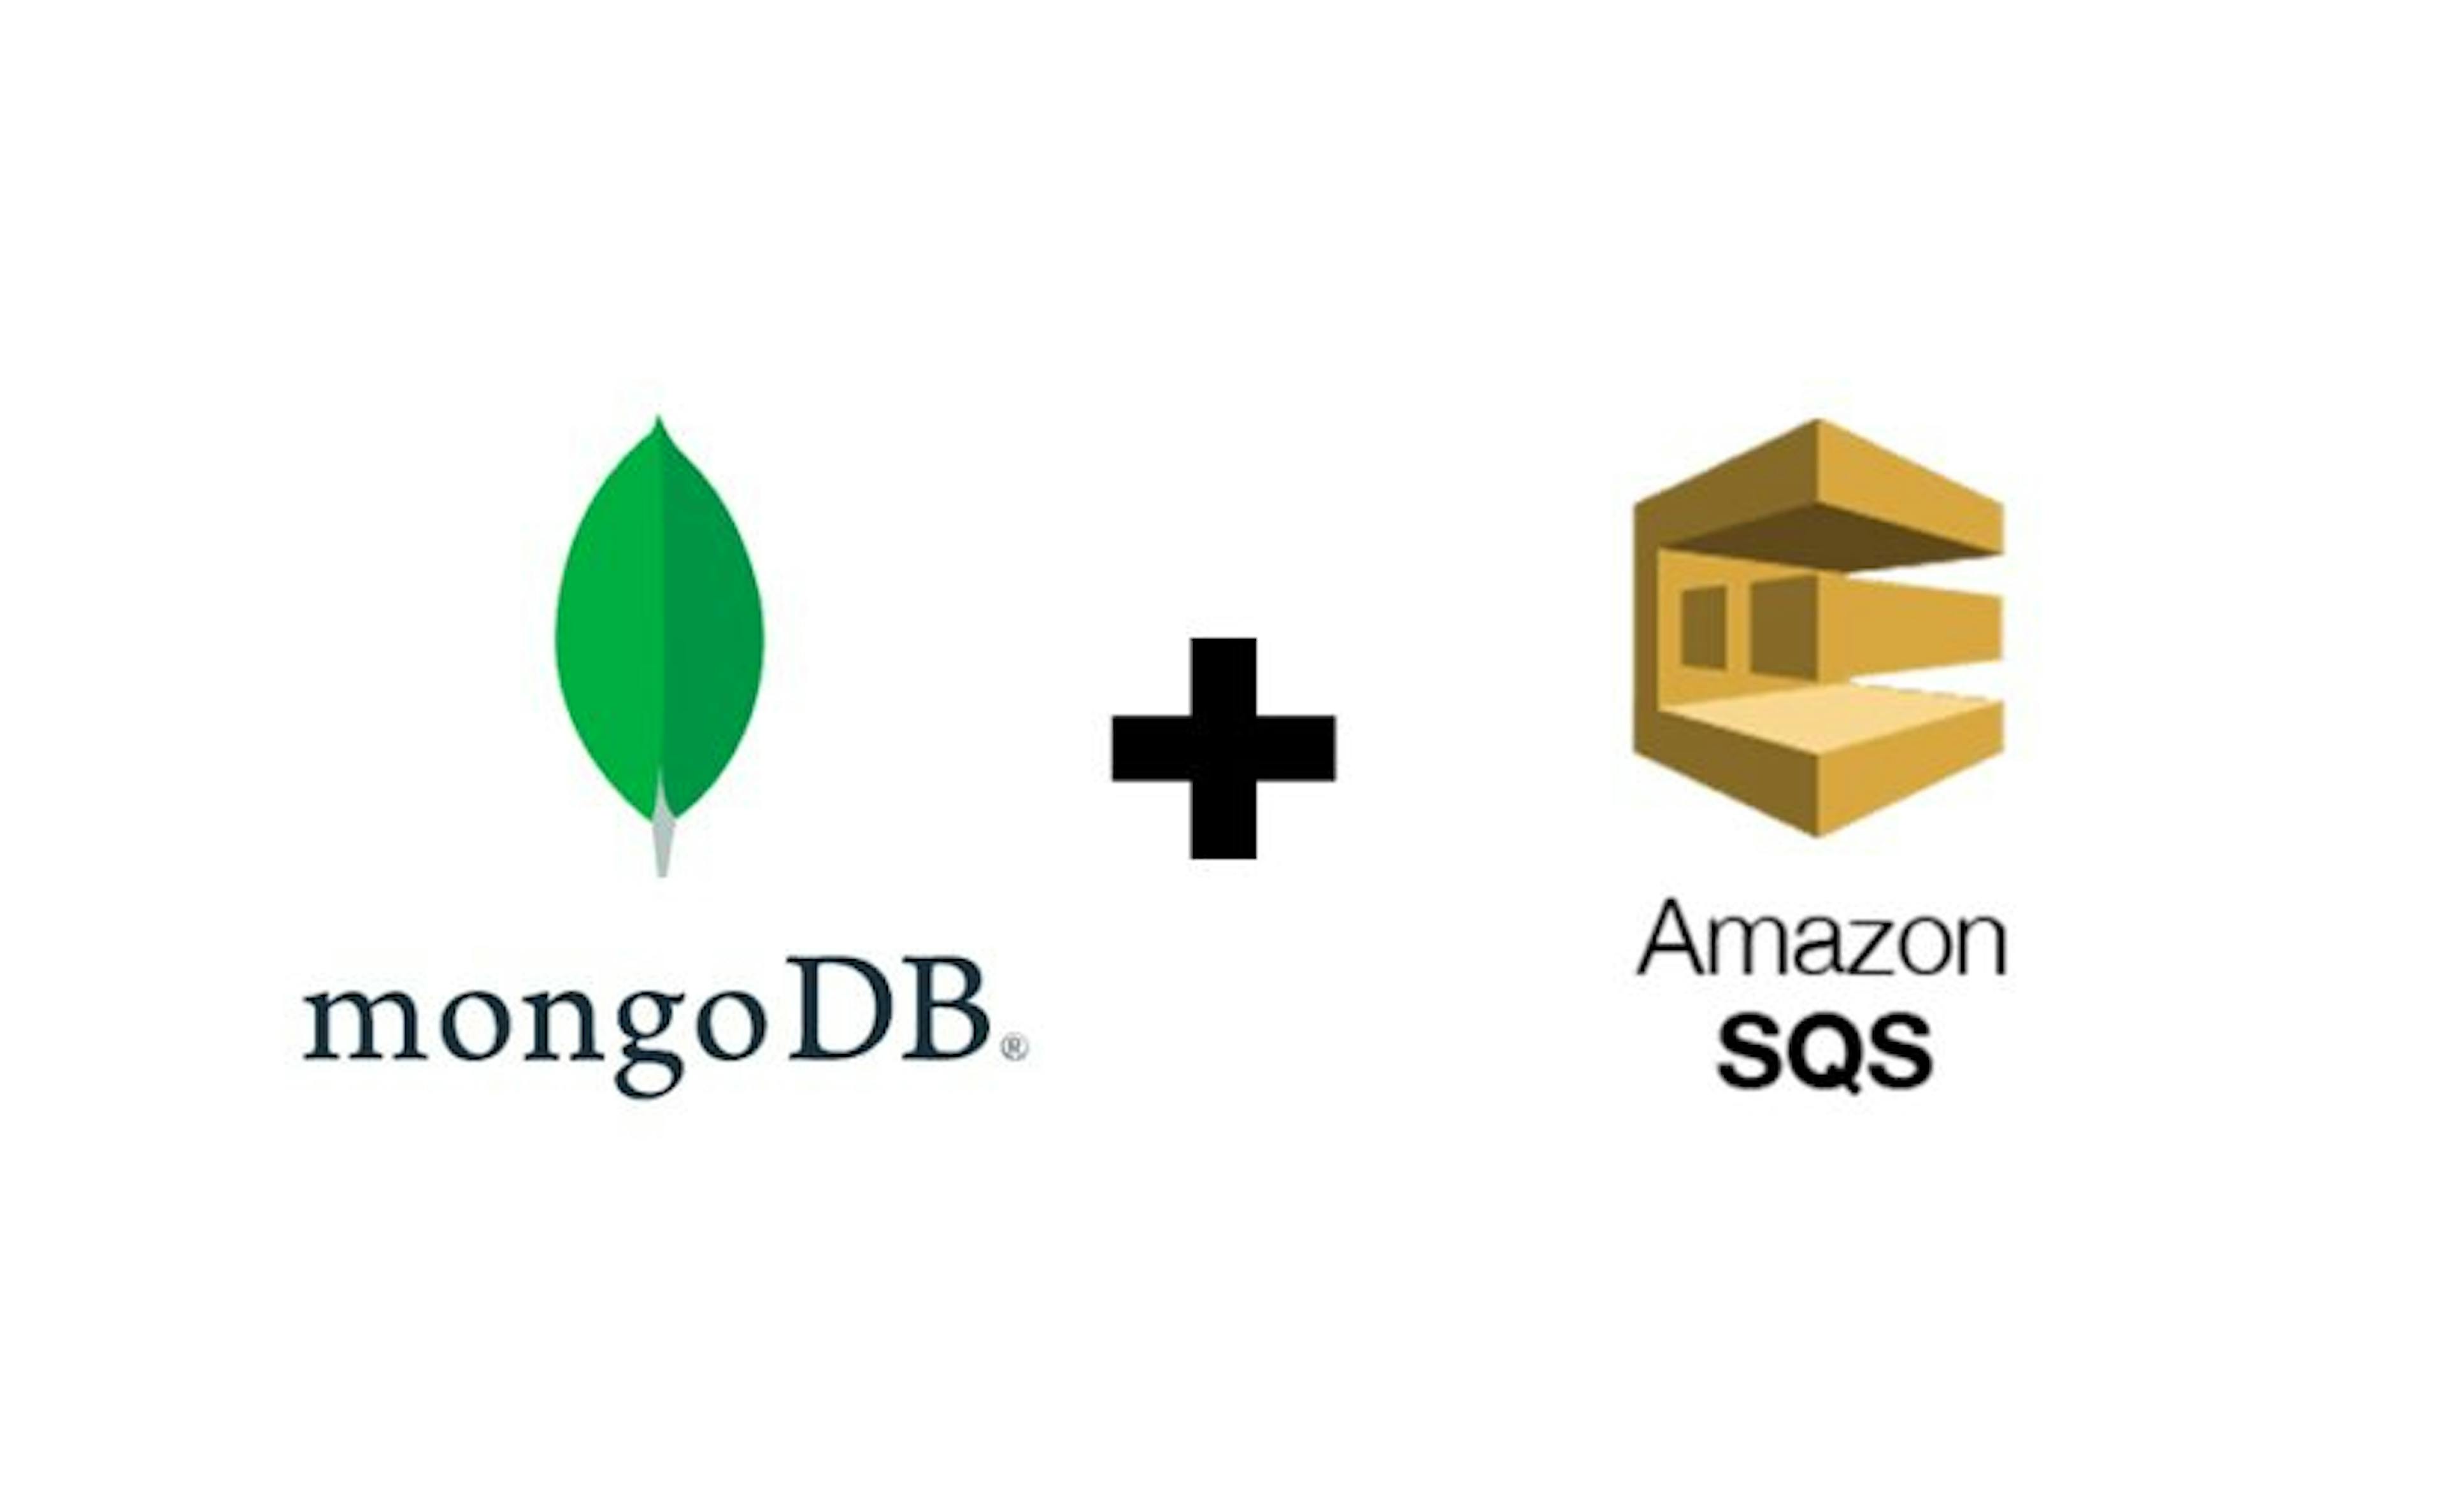 /improving-our-mongodb-write-throughput-with-sqs feature image